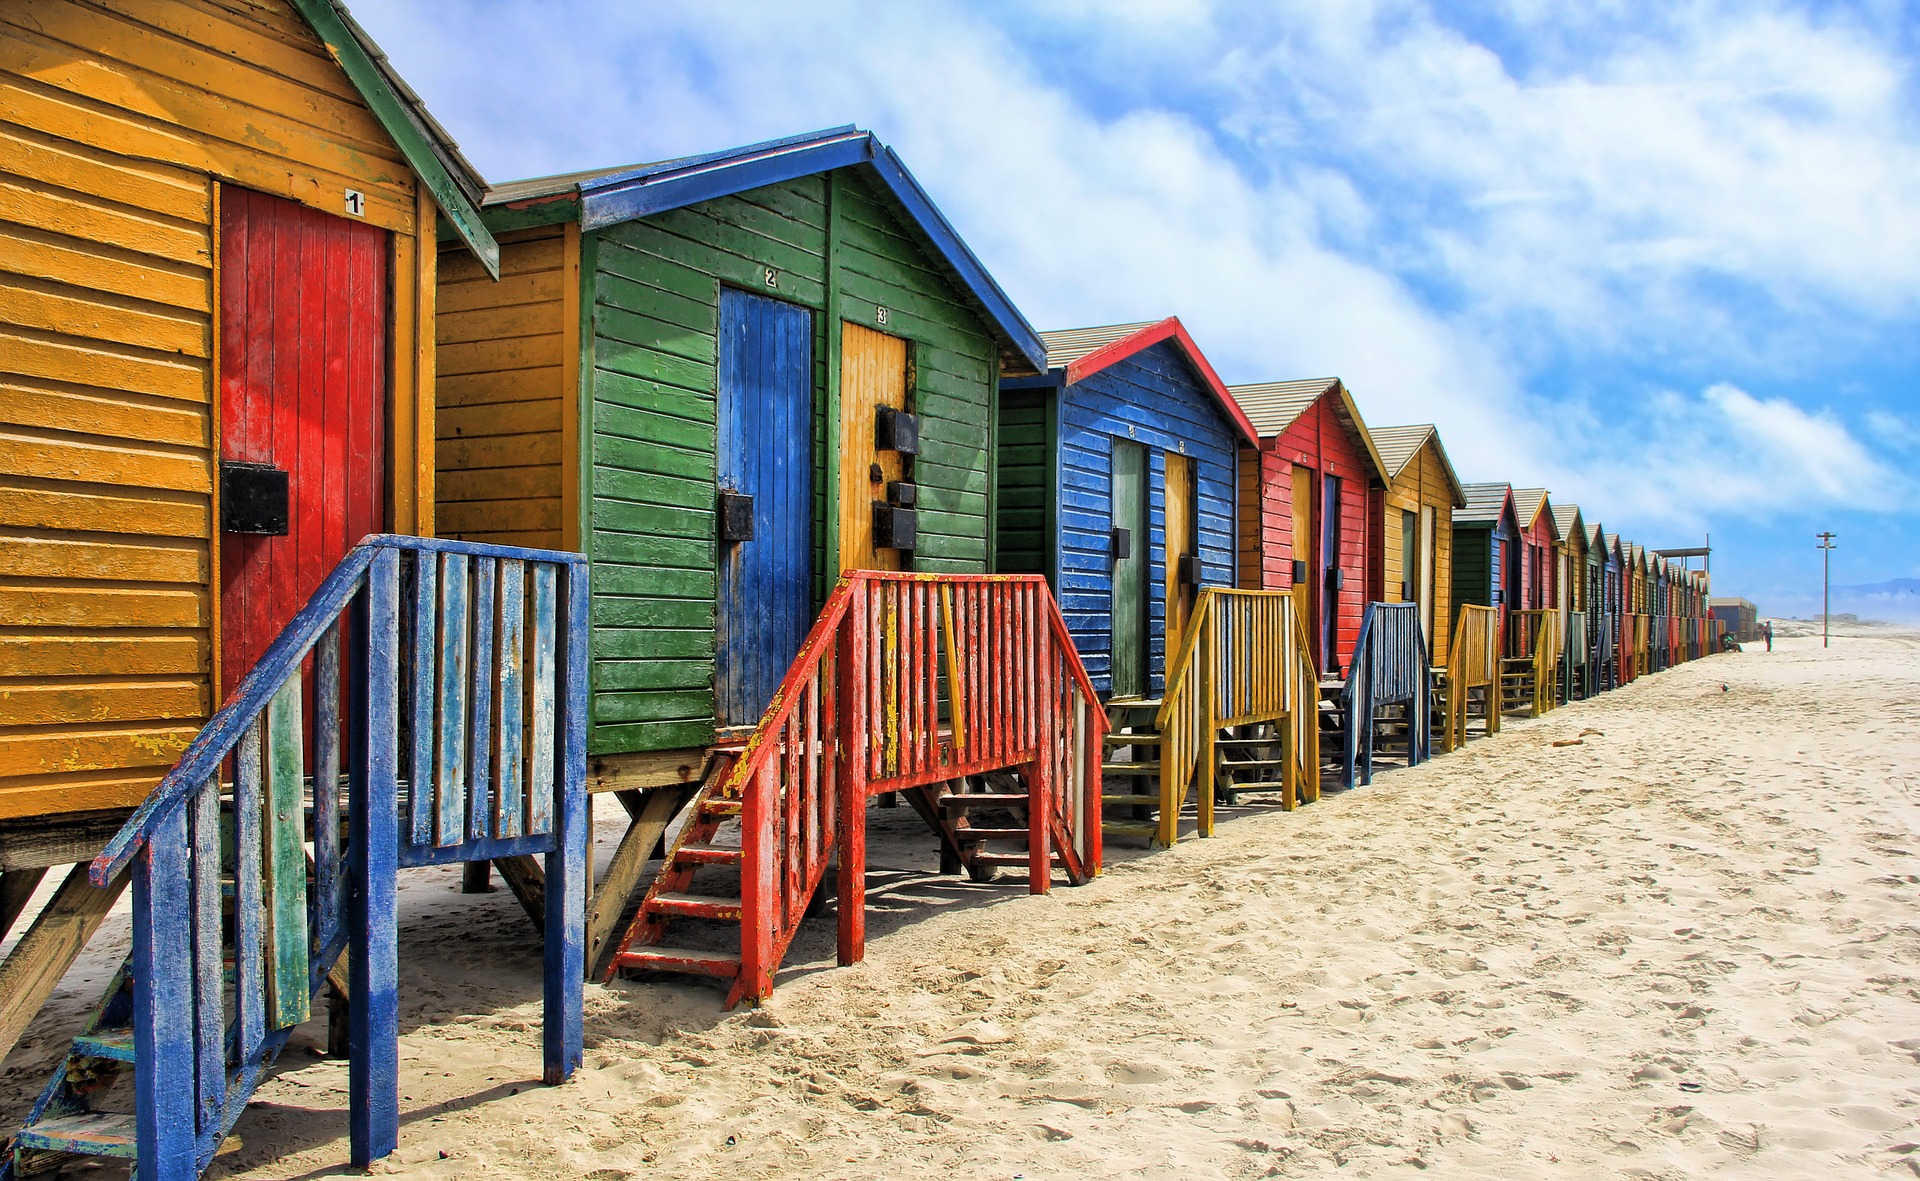 The brightly colored beach houses at Muizenberg beach near Cape Town South Africa